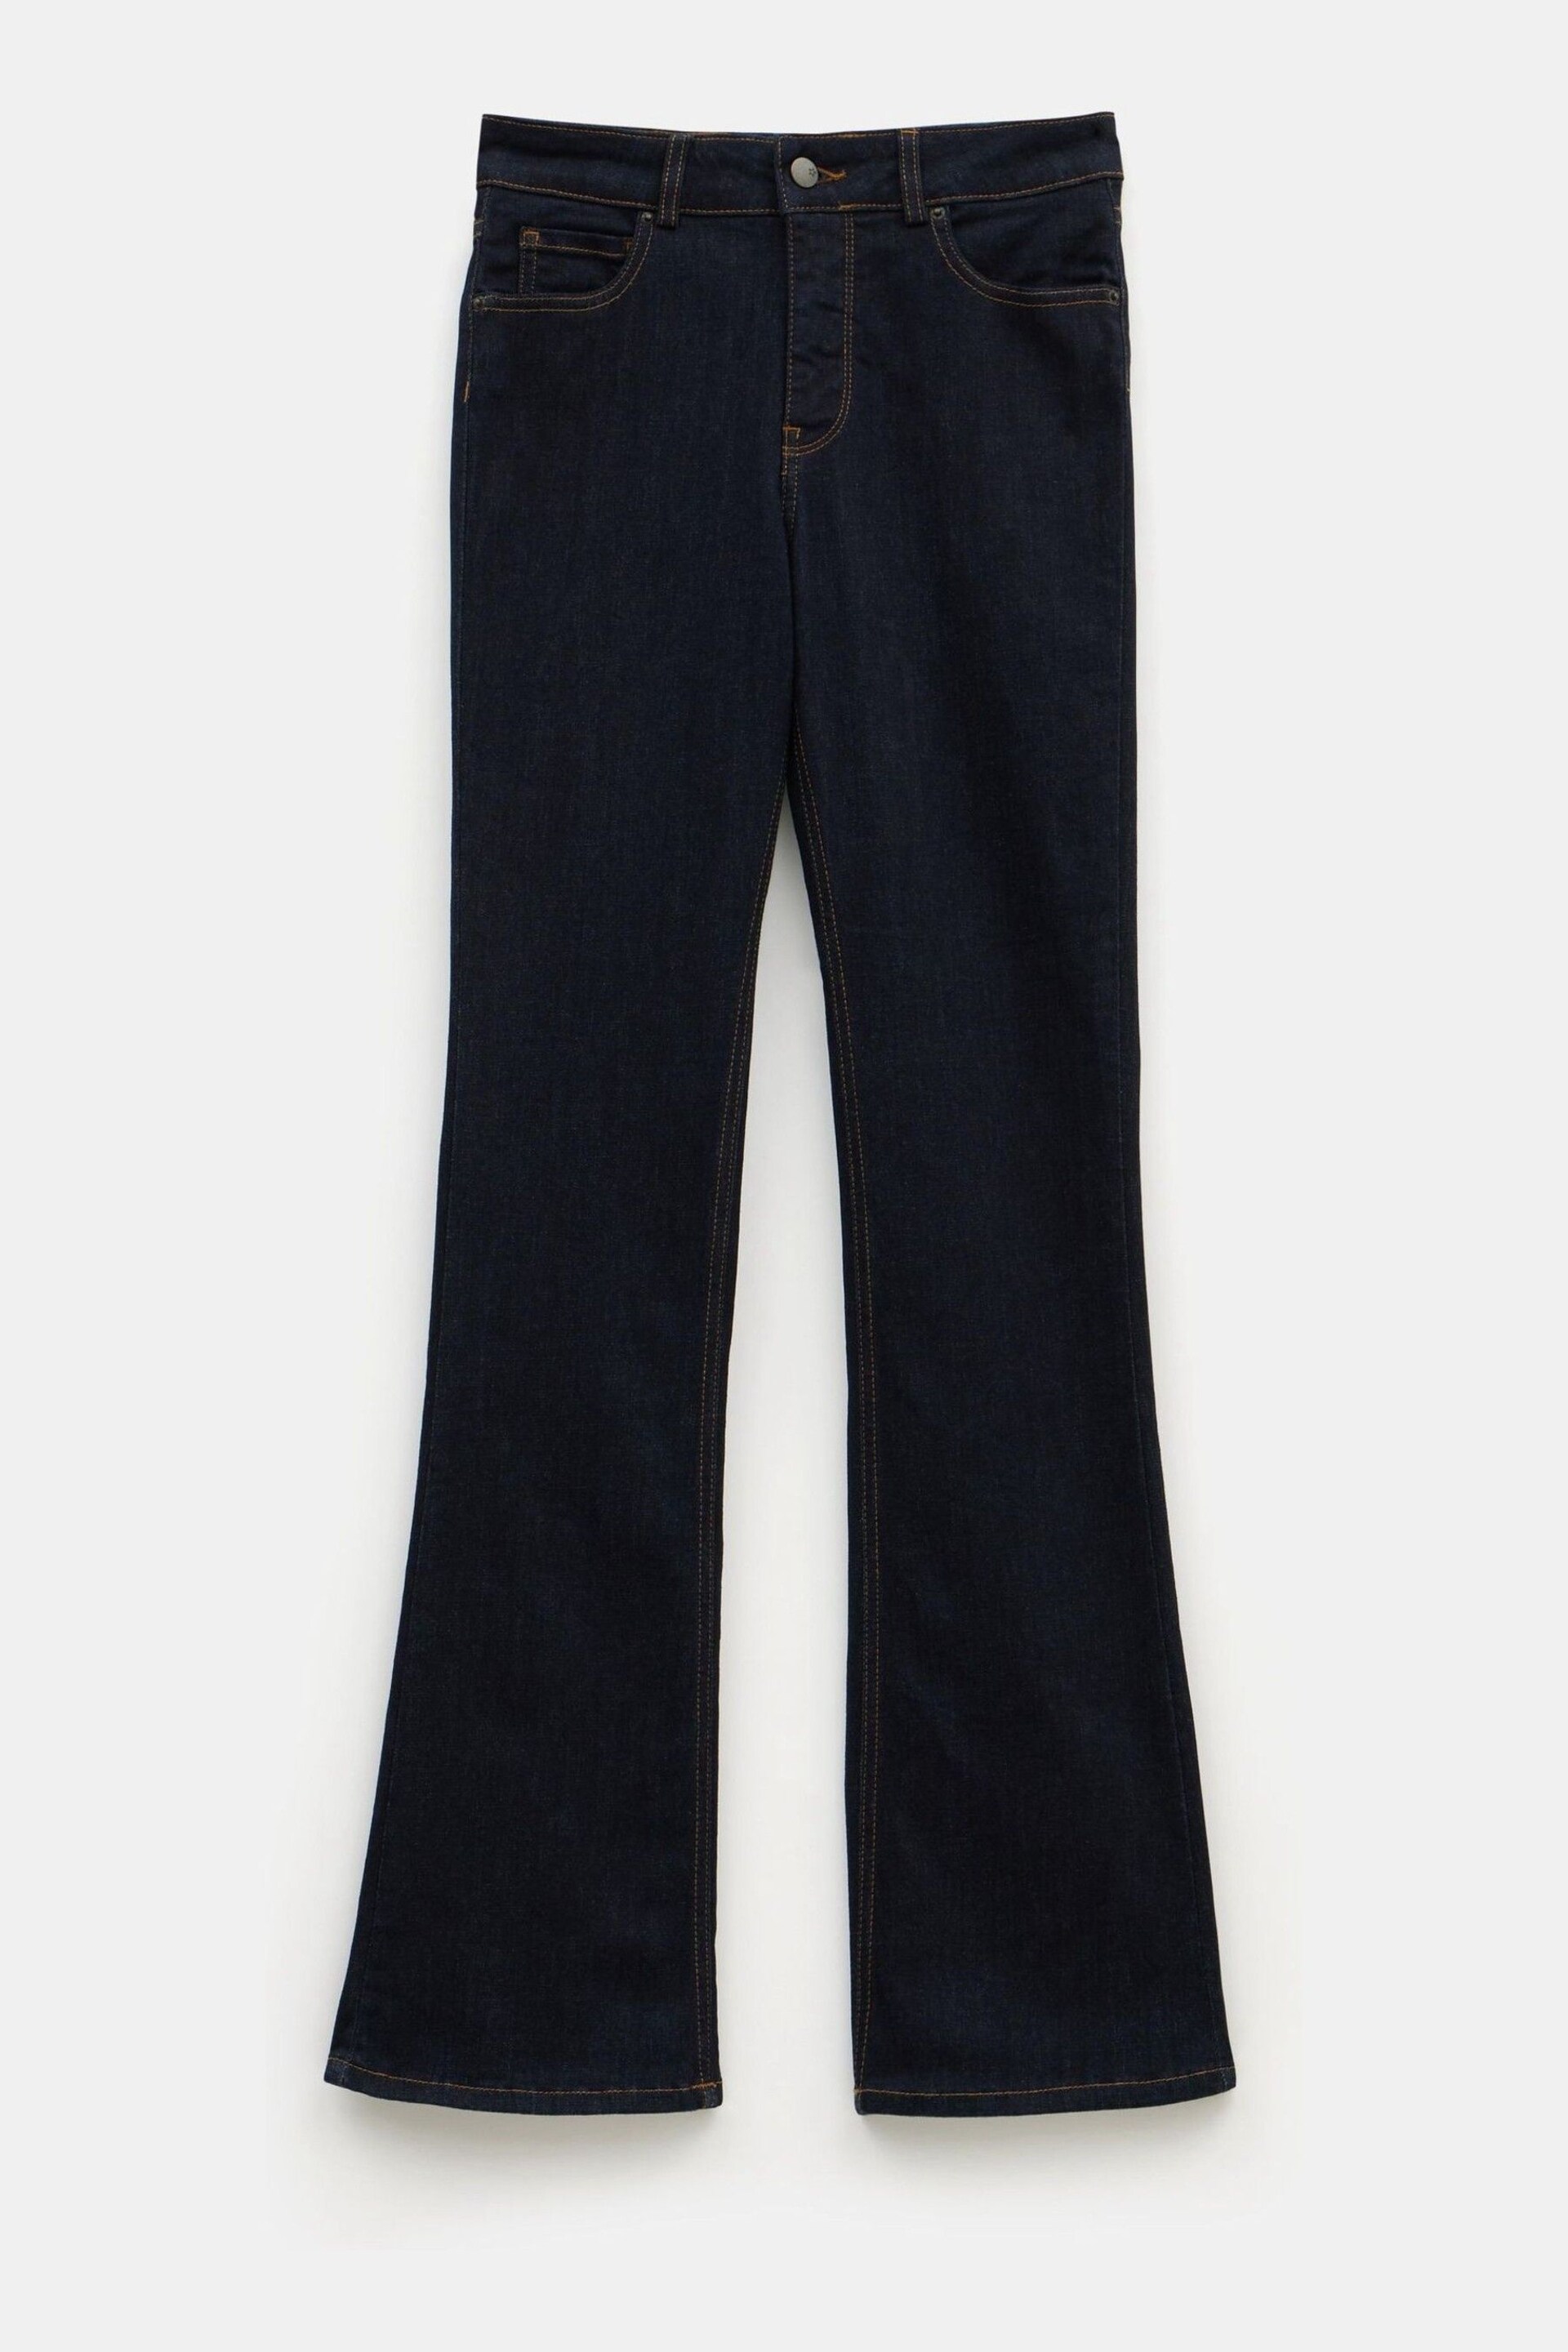 Hush Blue Lorna Bootcut Jeans - Image 5 of 5